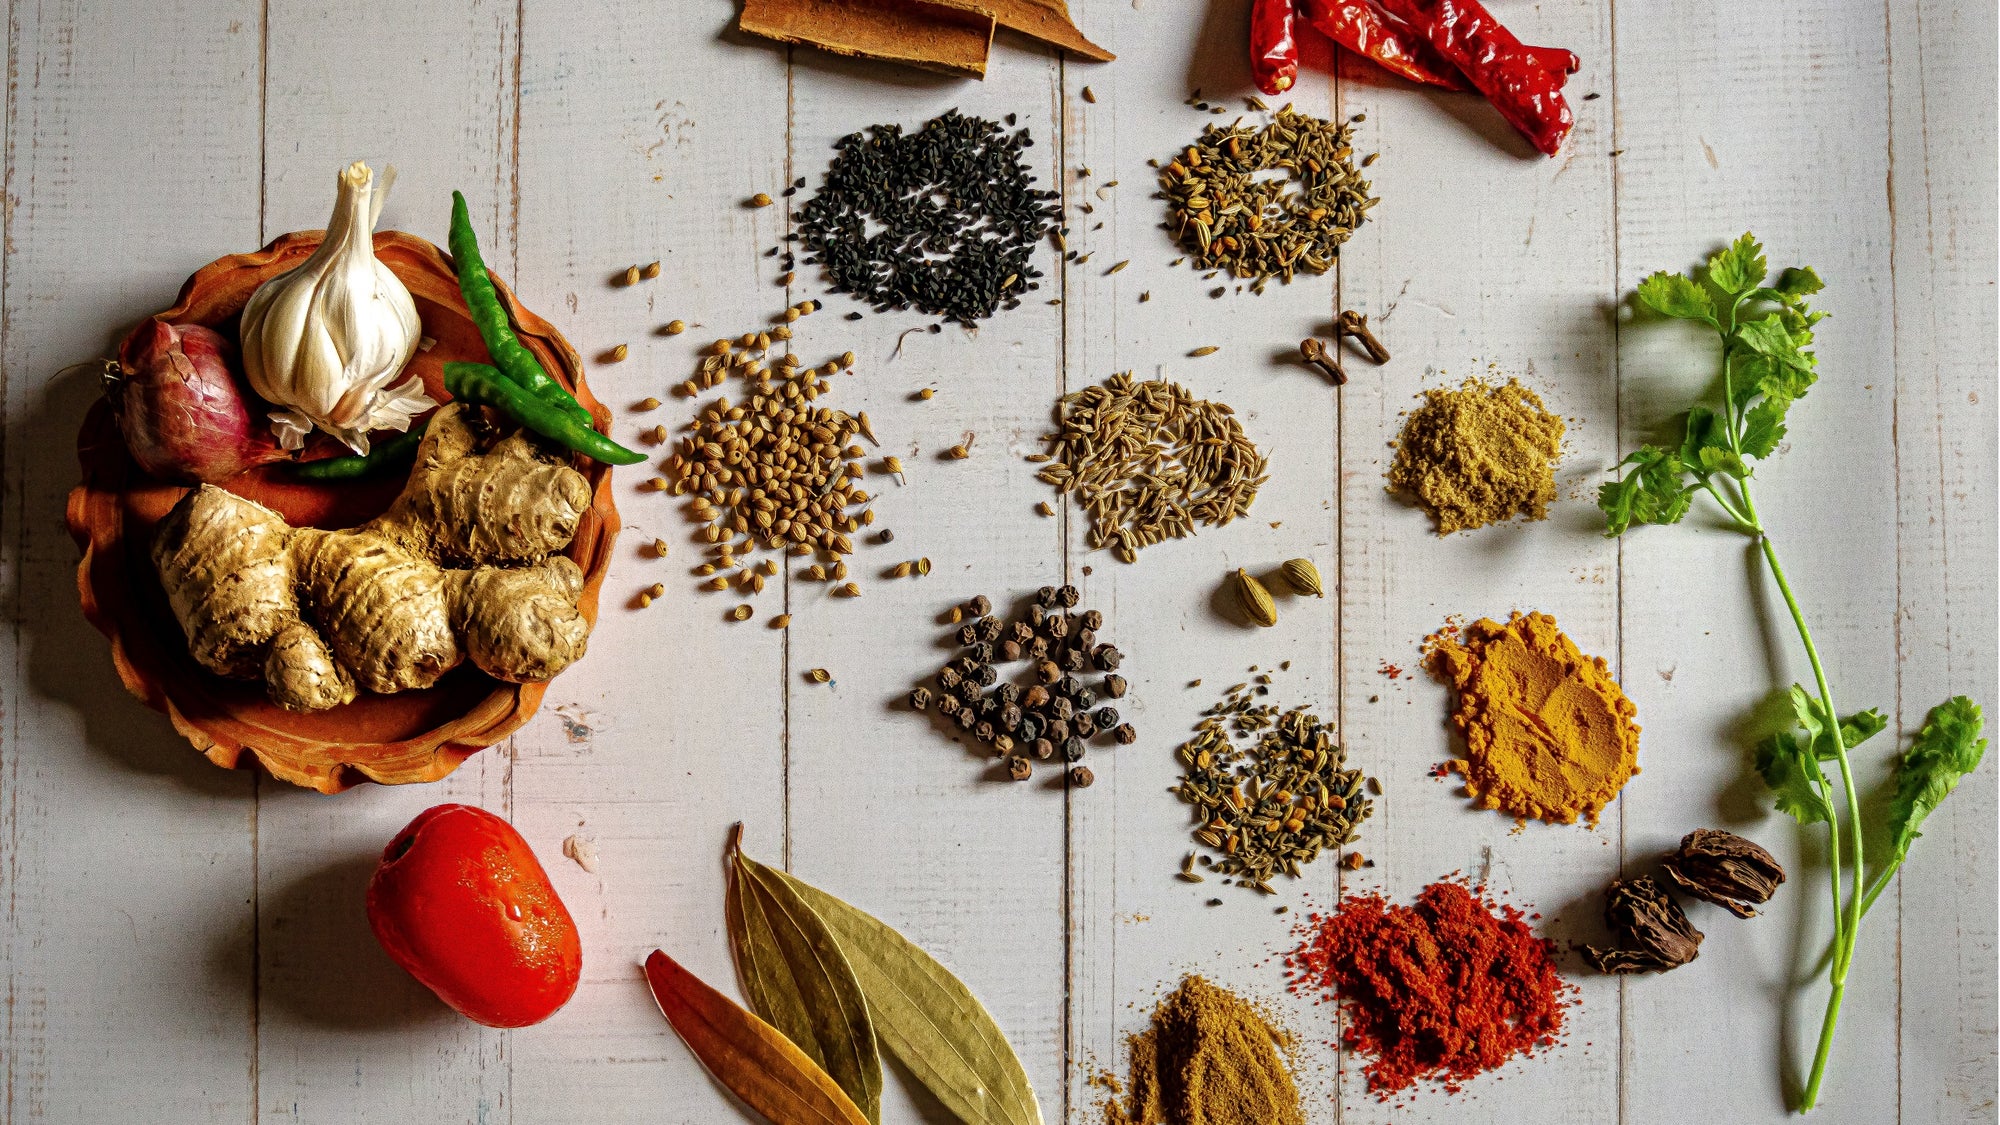 Pepper, ginger and turmeric, spices that reduce inflammation, on a counter in small piles